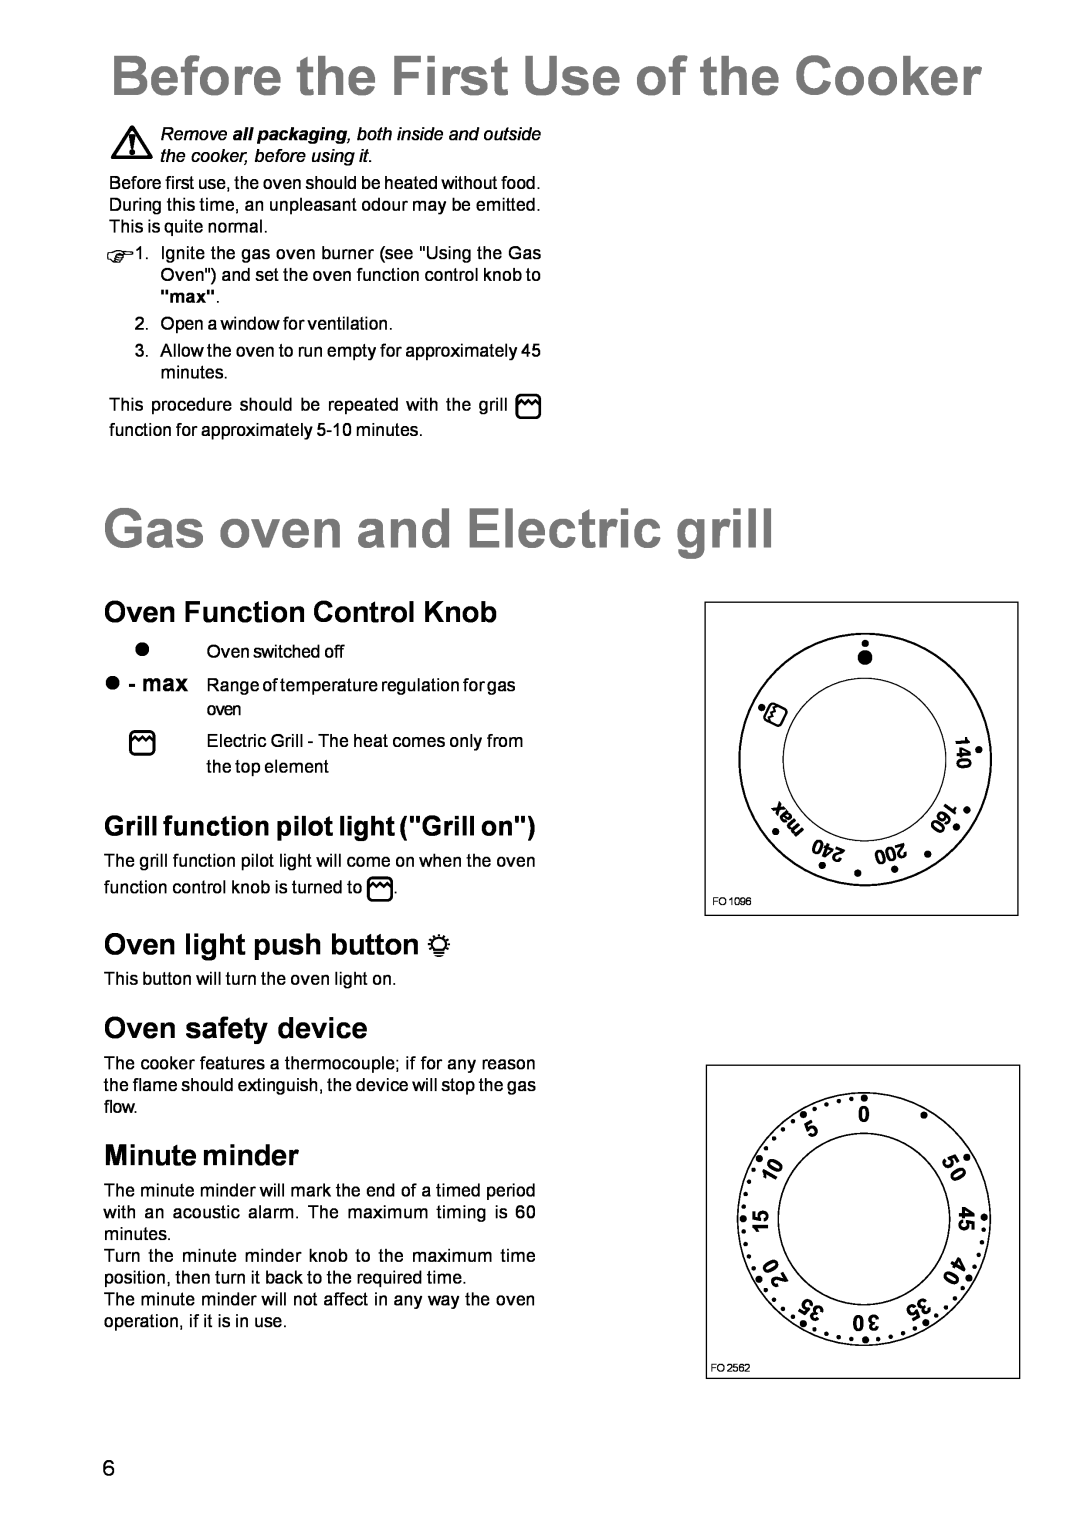 Electrolux CSIG 509 manual Before the First Use of the Cooker, Gas oven and Electric grill, Oven Function Control Knob 